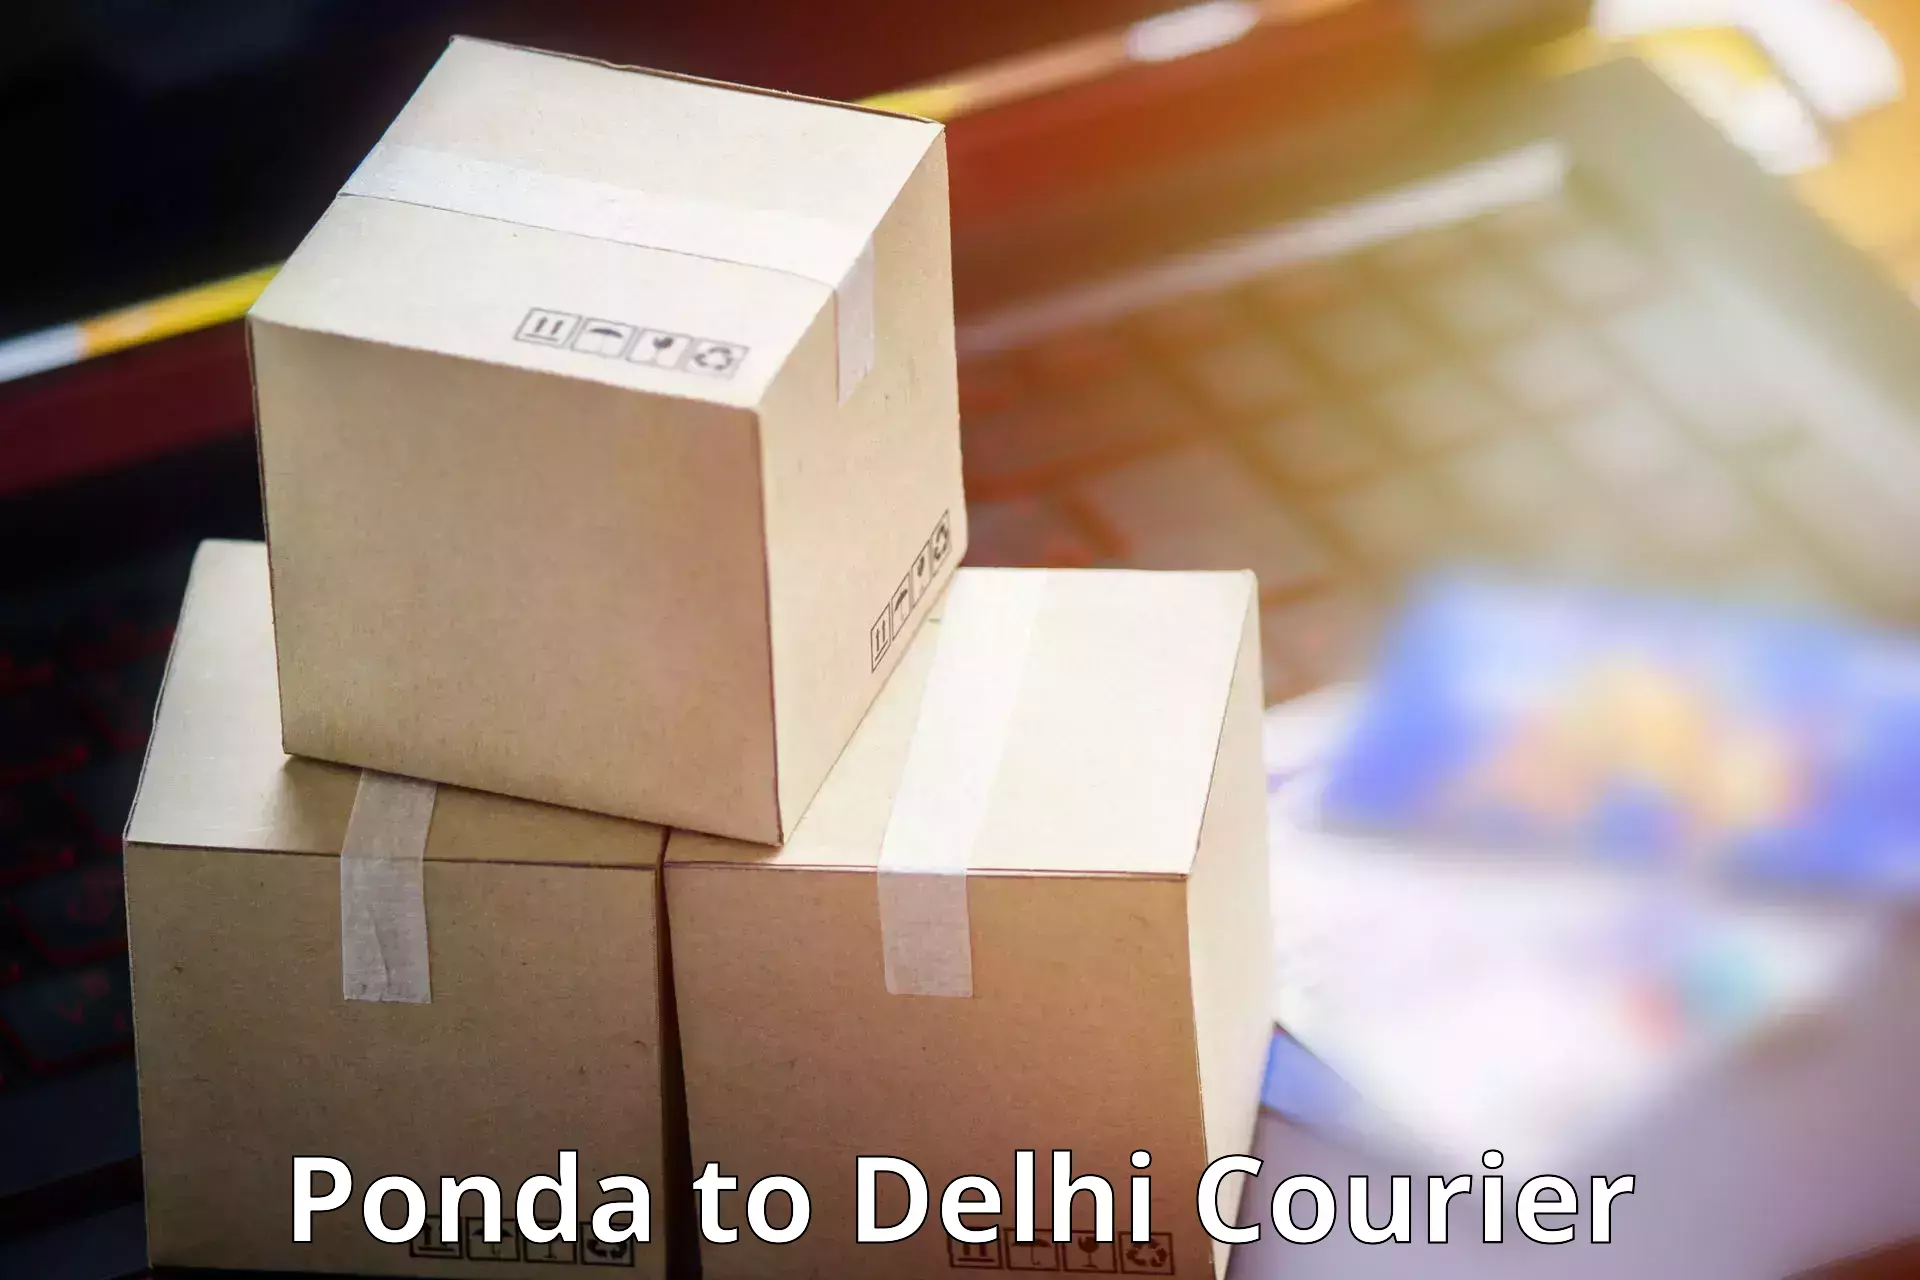 Package delivery network Ponda to Delhi